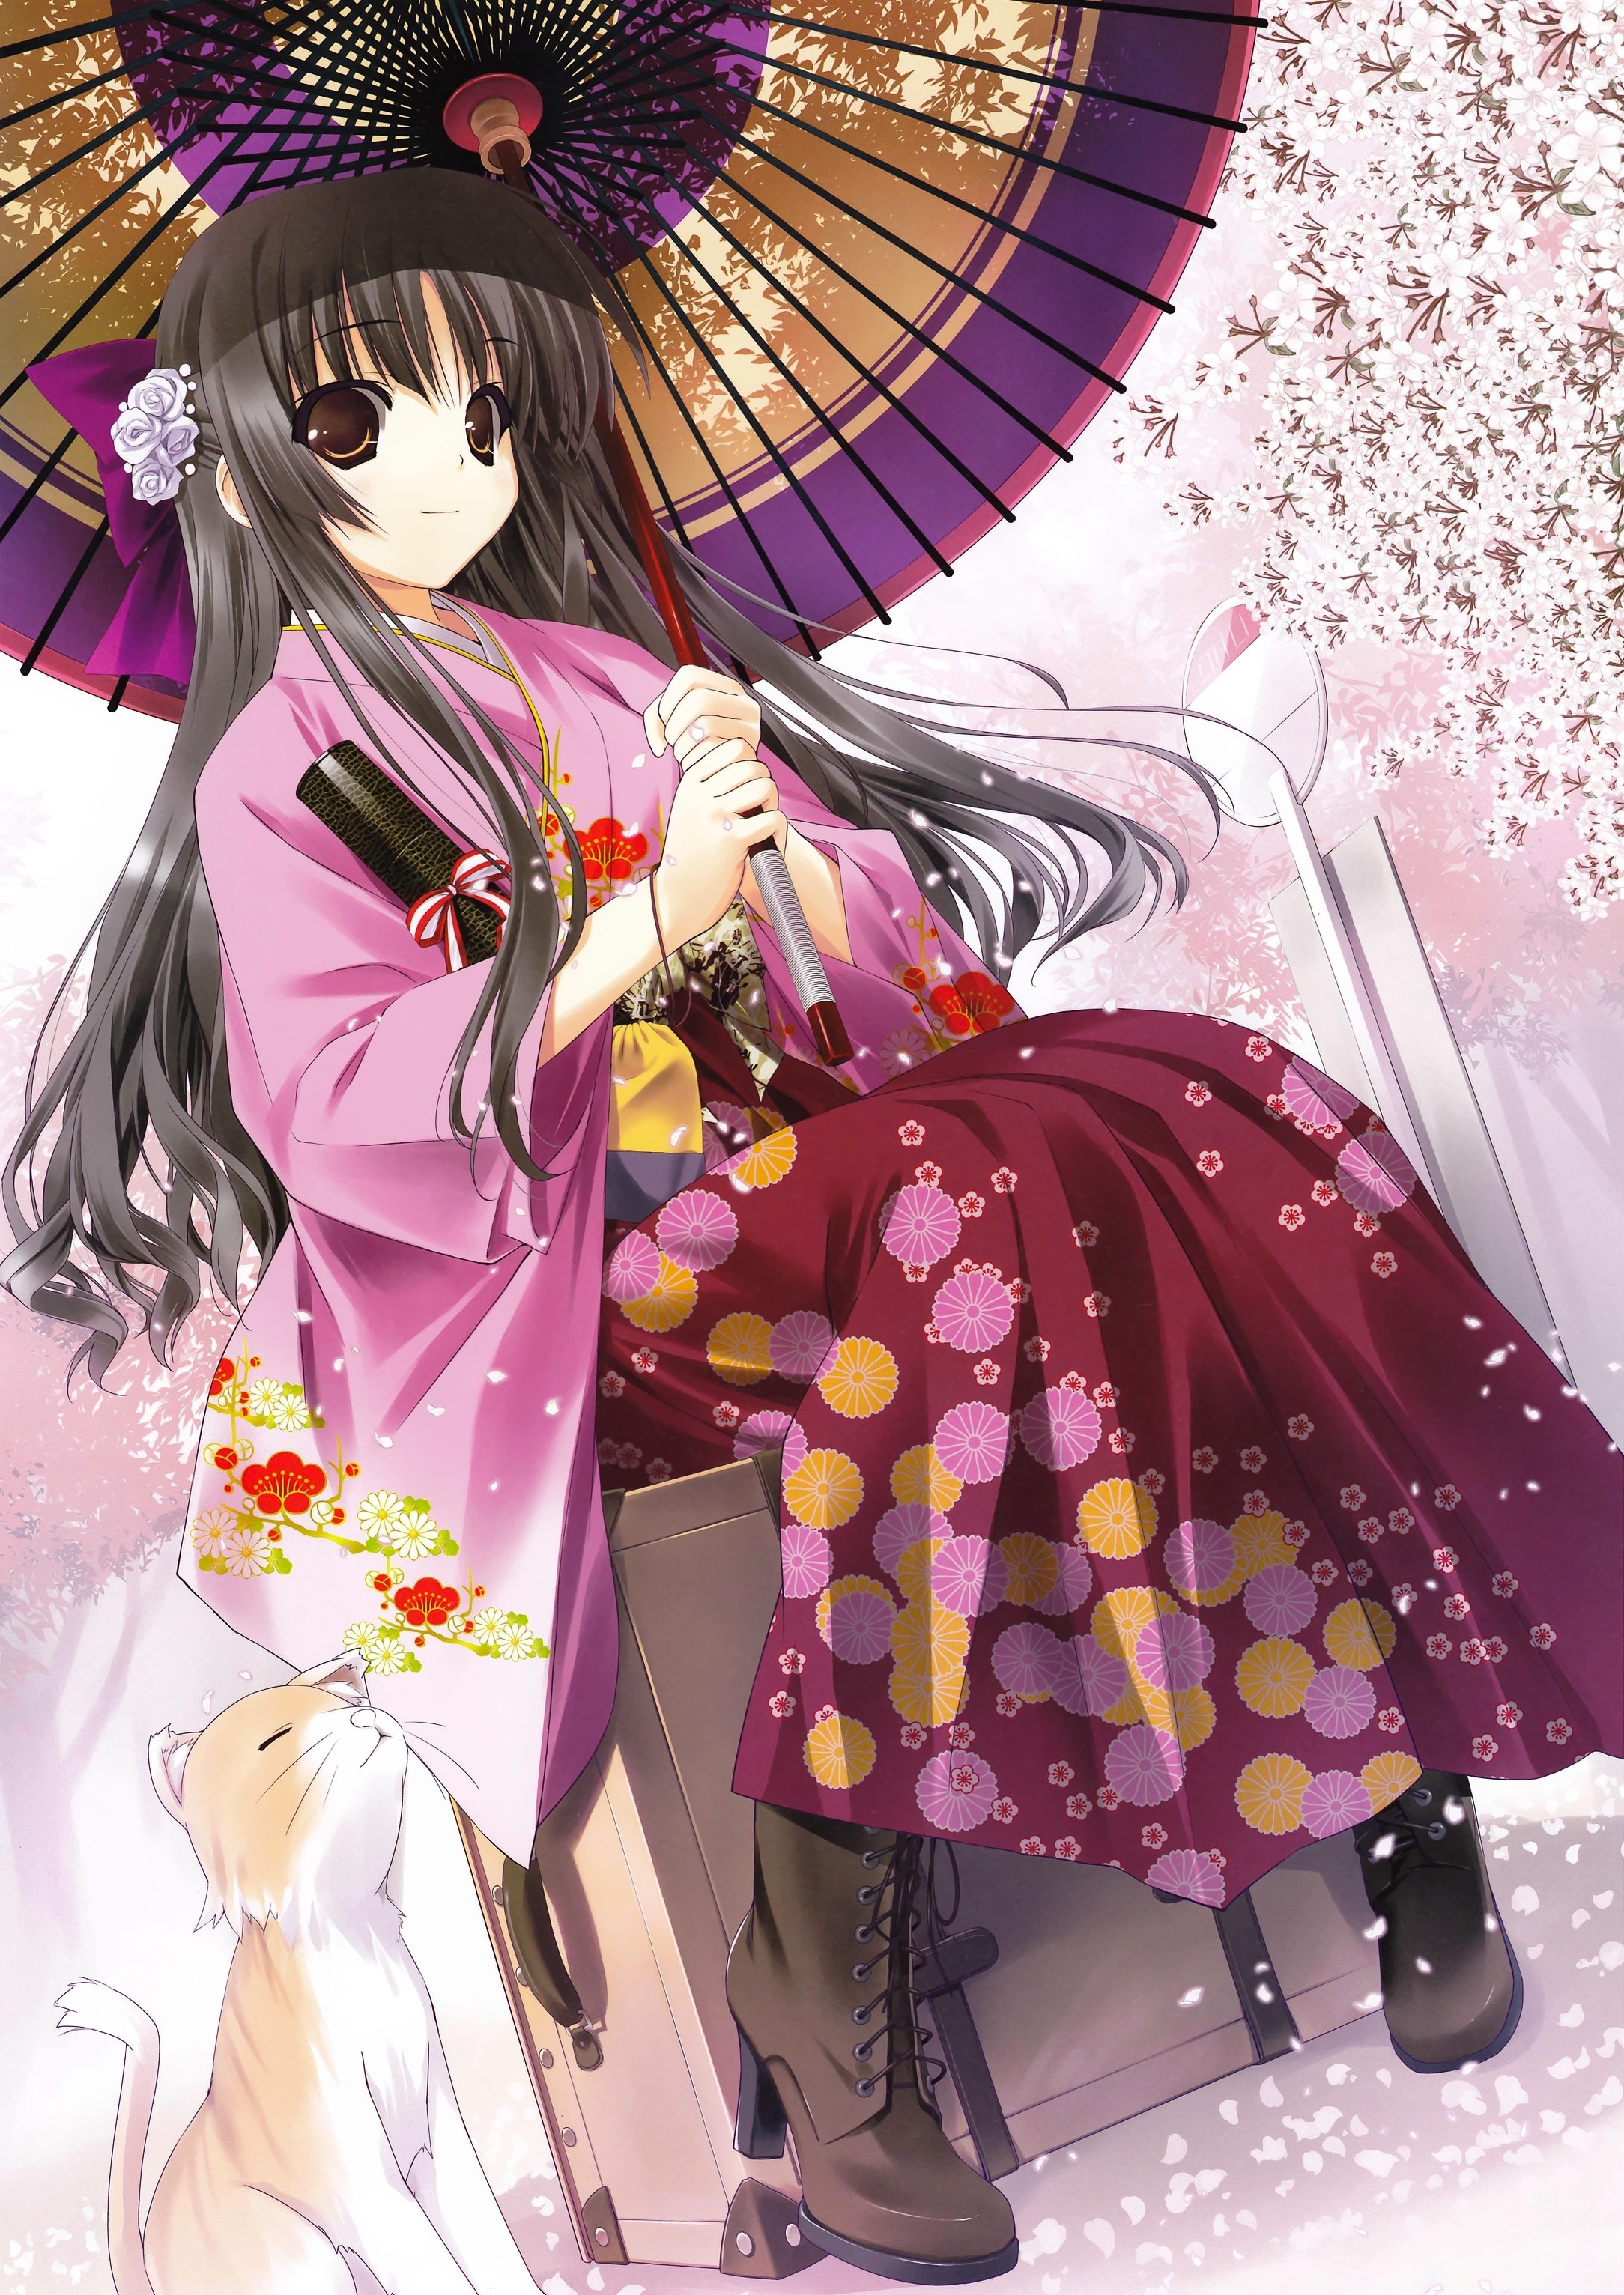 Download Wallpaper, Download 2168x3064 dress cats animals long hair anime umbrellas japanese clothes anime girls original characters Wallpaper –Free Wallpaper Download